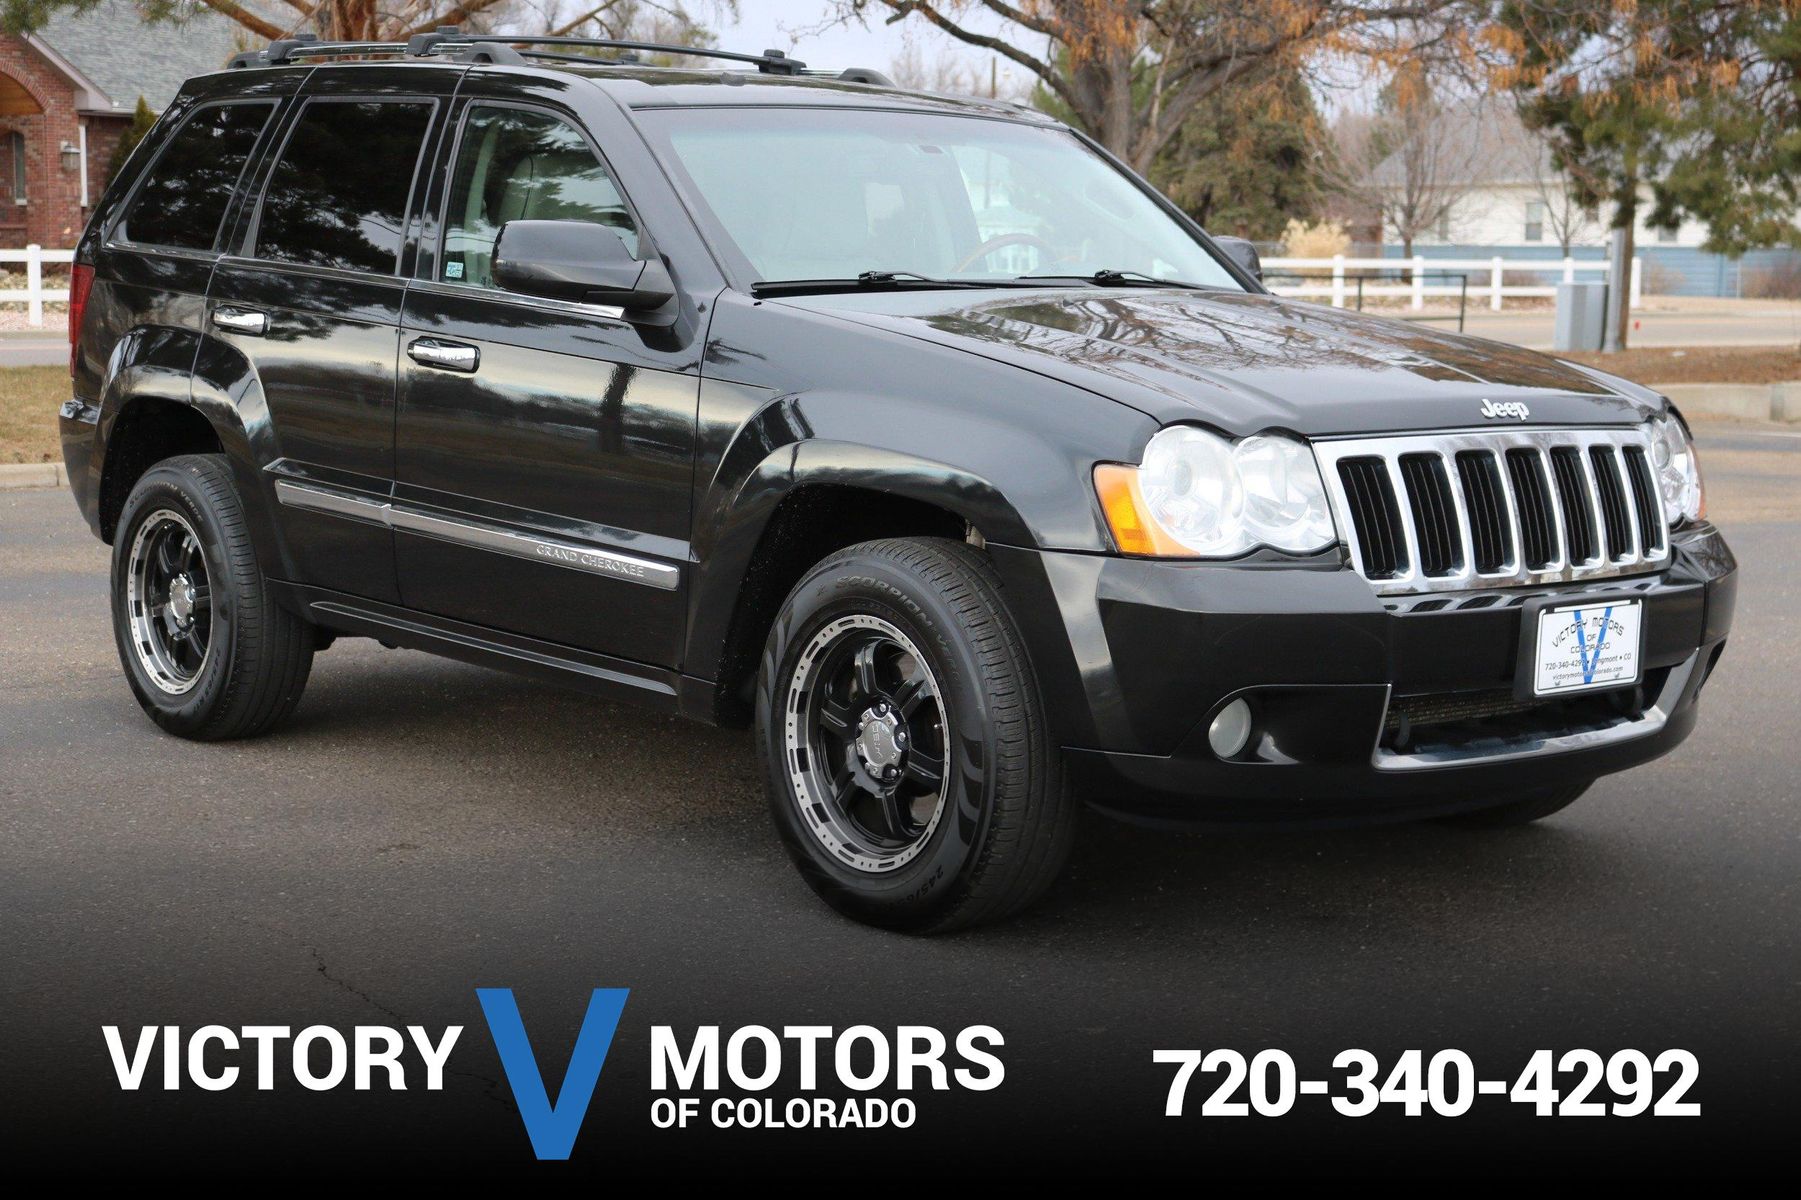 2008 Jeep Grand Cherokee Overland | Victory Motors of Colorado 2008 Jeep Grand Cherokee Tow Package